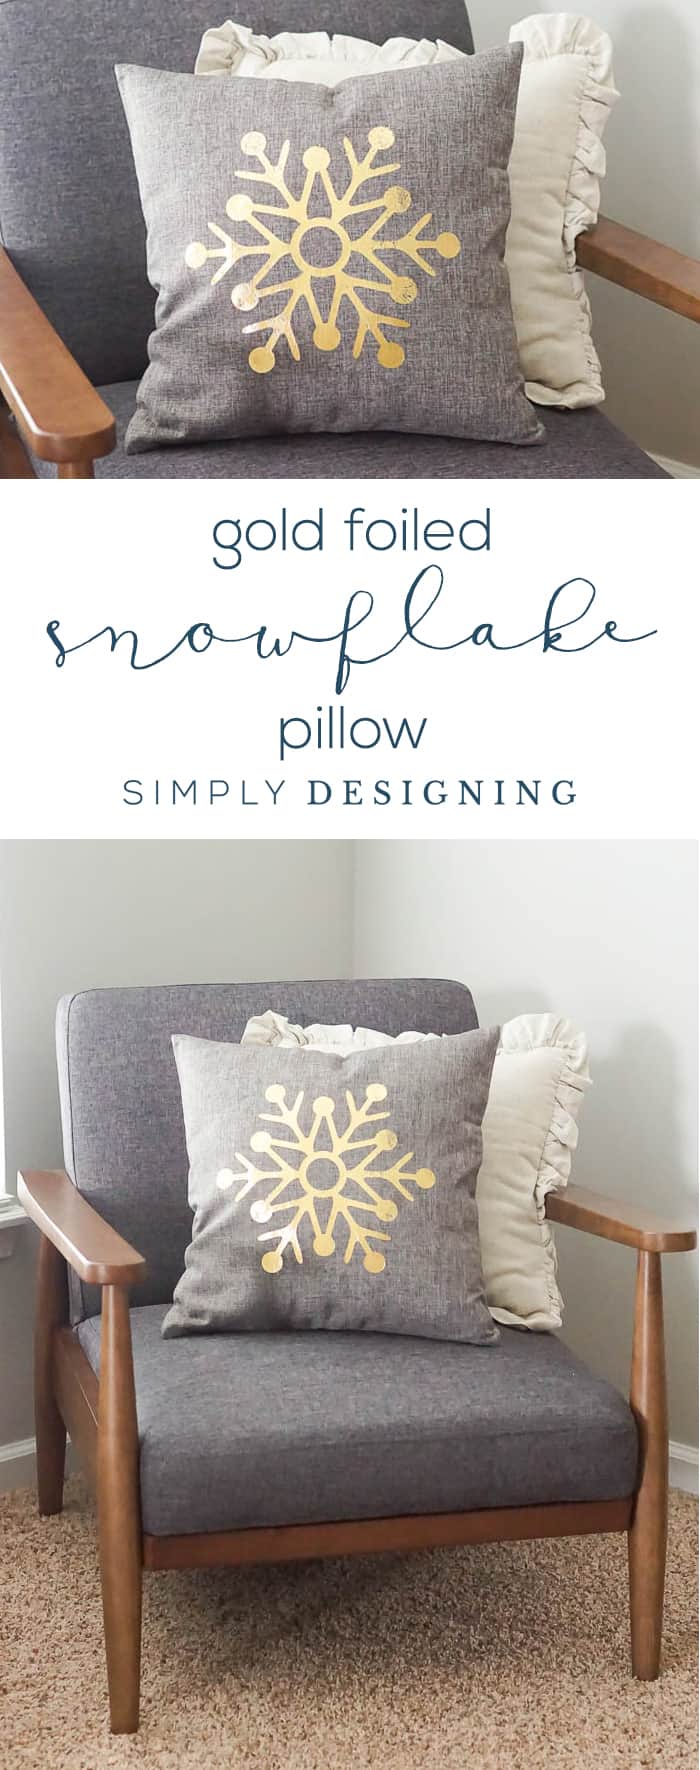 How to Foil Fabric and make a Gold Foiled Snowflake Pillow